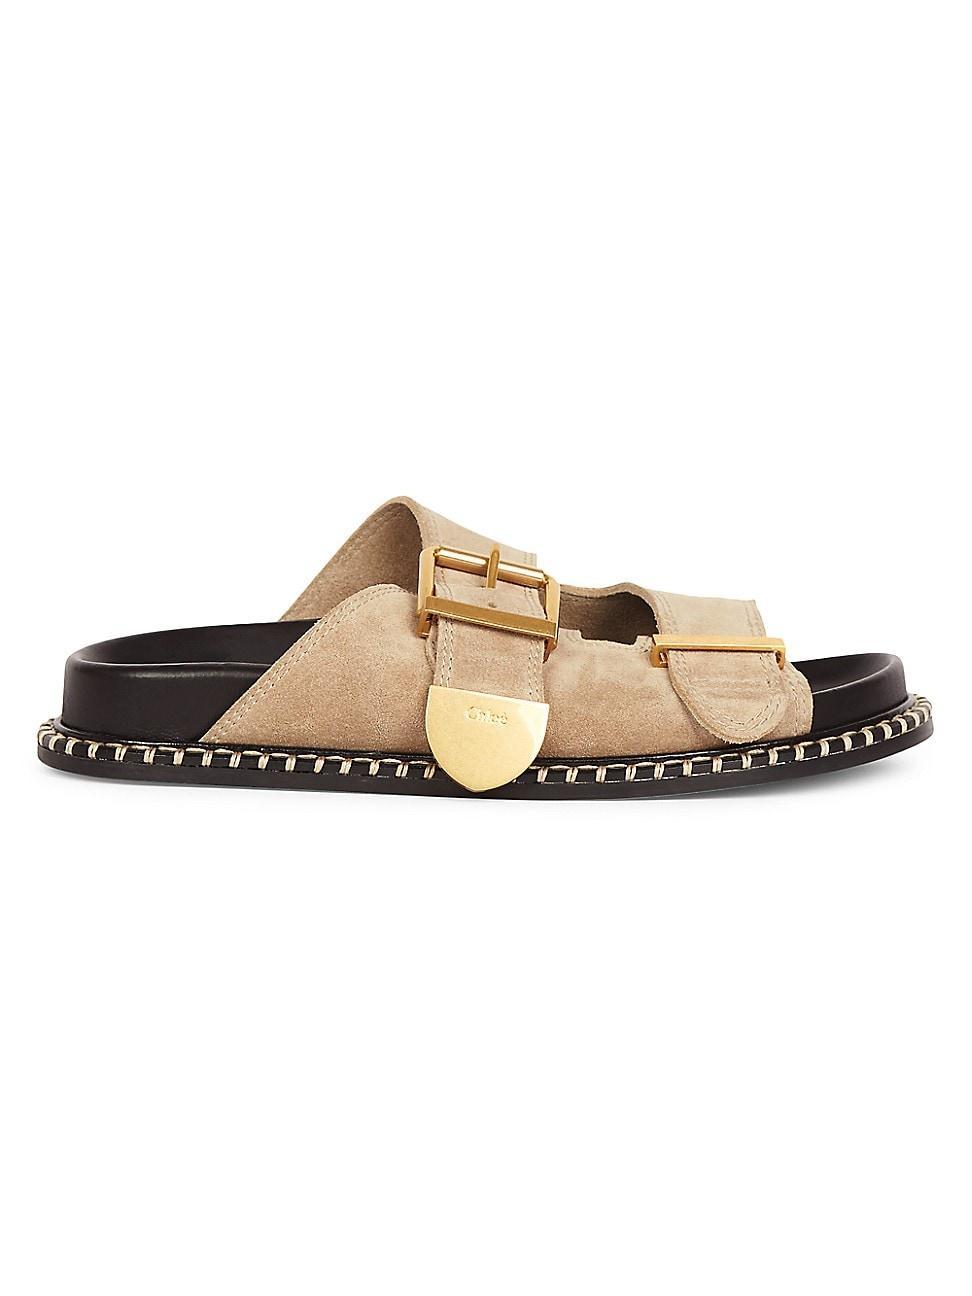 Rebecca Suede Dual-Buckle Slide Sandals Product Image